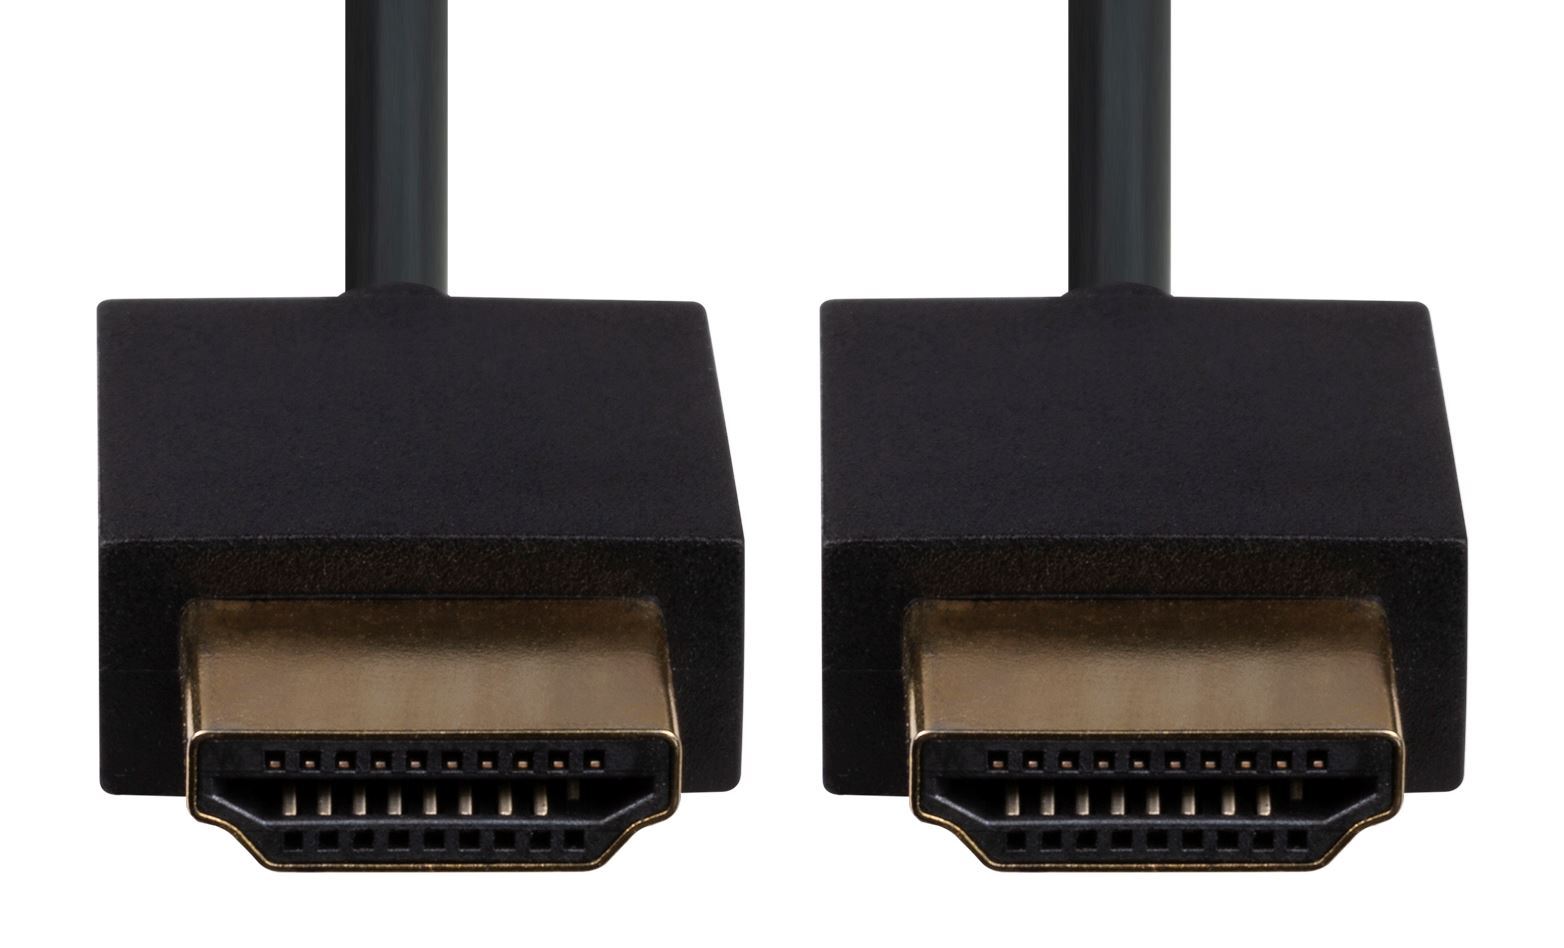 DYNAMIX_1M_HDMI_BLACK_Nano_High_Speed_With_Ethernet_Cable._Designed_for_UHD_Display_up_to_4K2K@60Hz._Slimline_Robust_Cable._Supports_CEC_2.0,_3D,_&_ARC._Supports_Up_to_32_Audio_Channels. 676